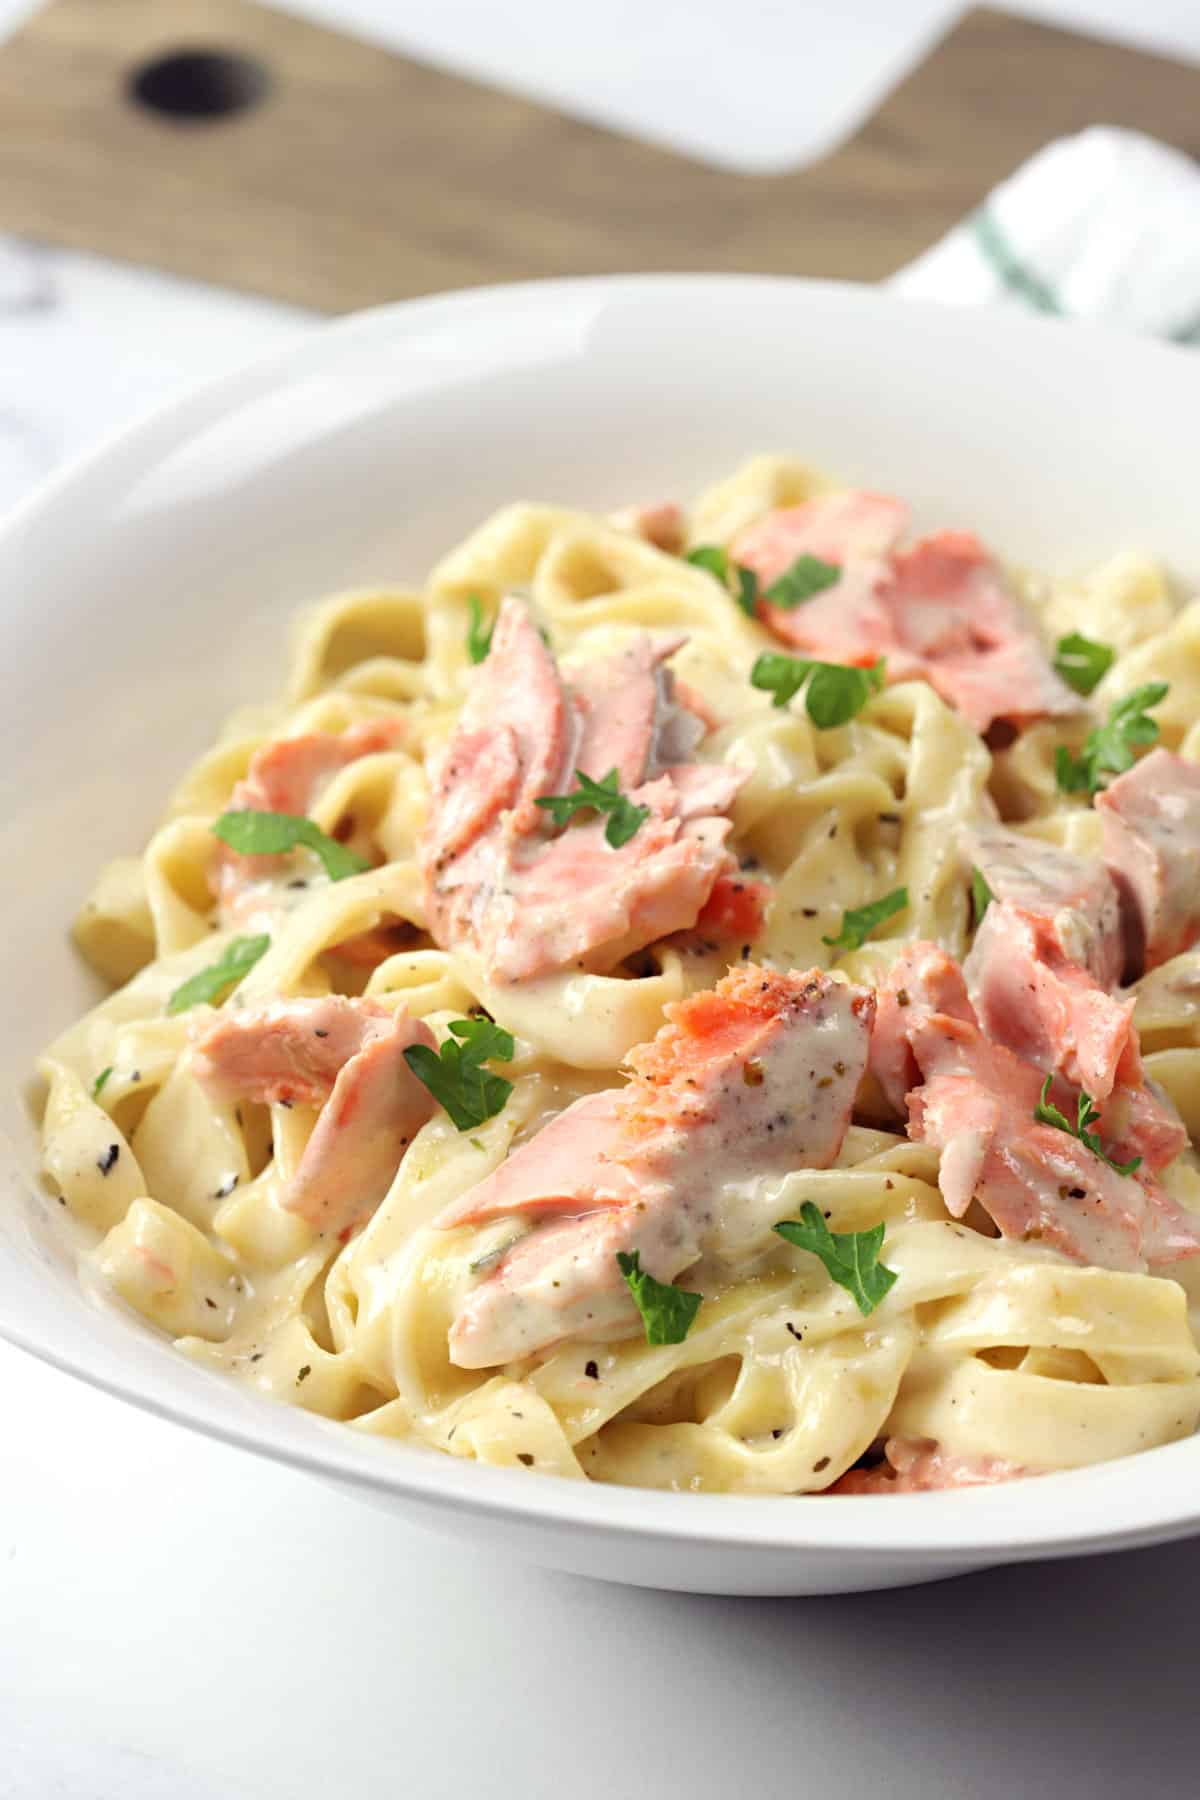 A bowl of fettuccine pasta topped with flaked salmon and parsley.